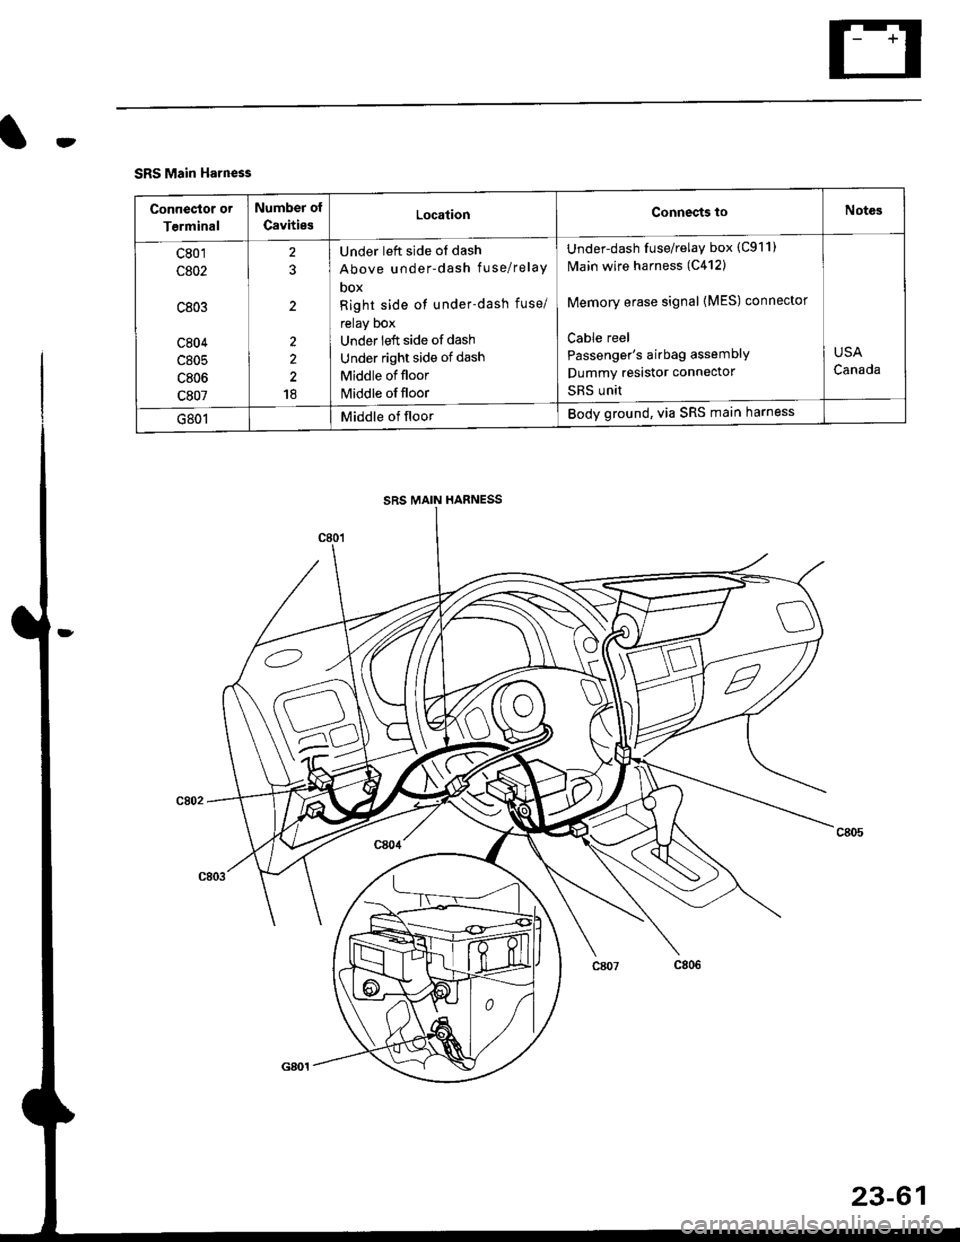 HONDA CIVIC 1996 6.G Owners Manual rt
SRS Main Harness
Conneclor or
Terminal
Number of
CavitiesLocationConnects toNotes
c801
c802
c803
c804
c805
c806
c807
2?
2
2
2
18
Under left side of dash
Above under-dash fuse/relaY
DOX
Right side o